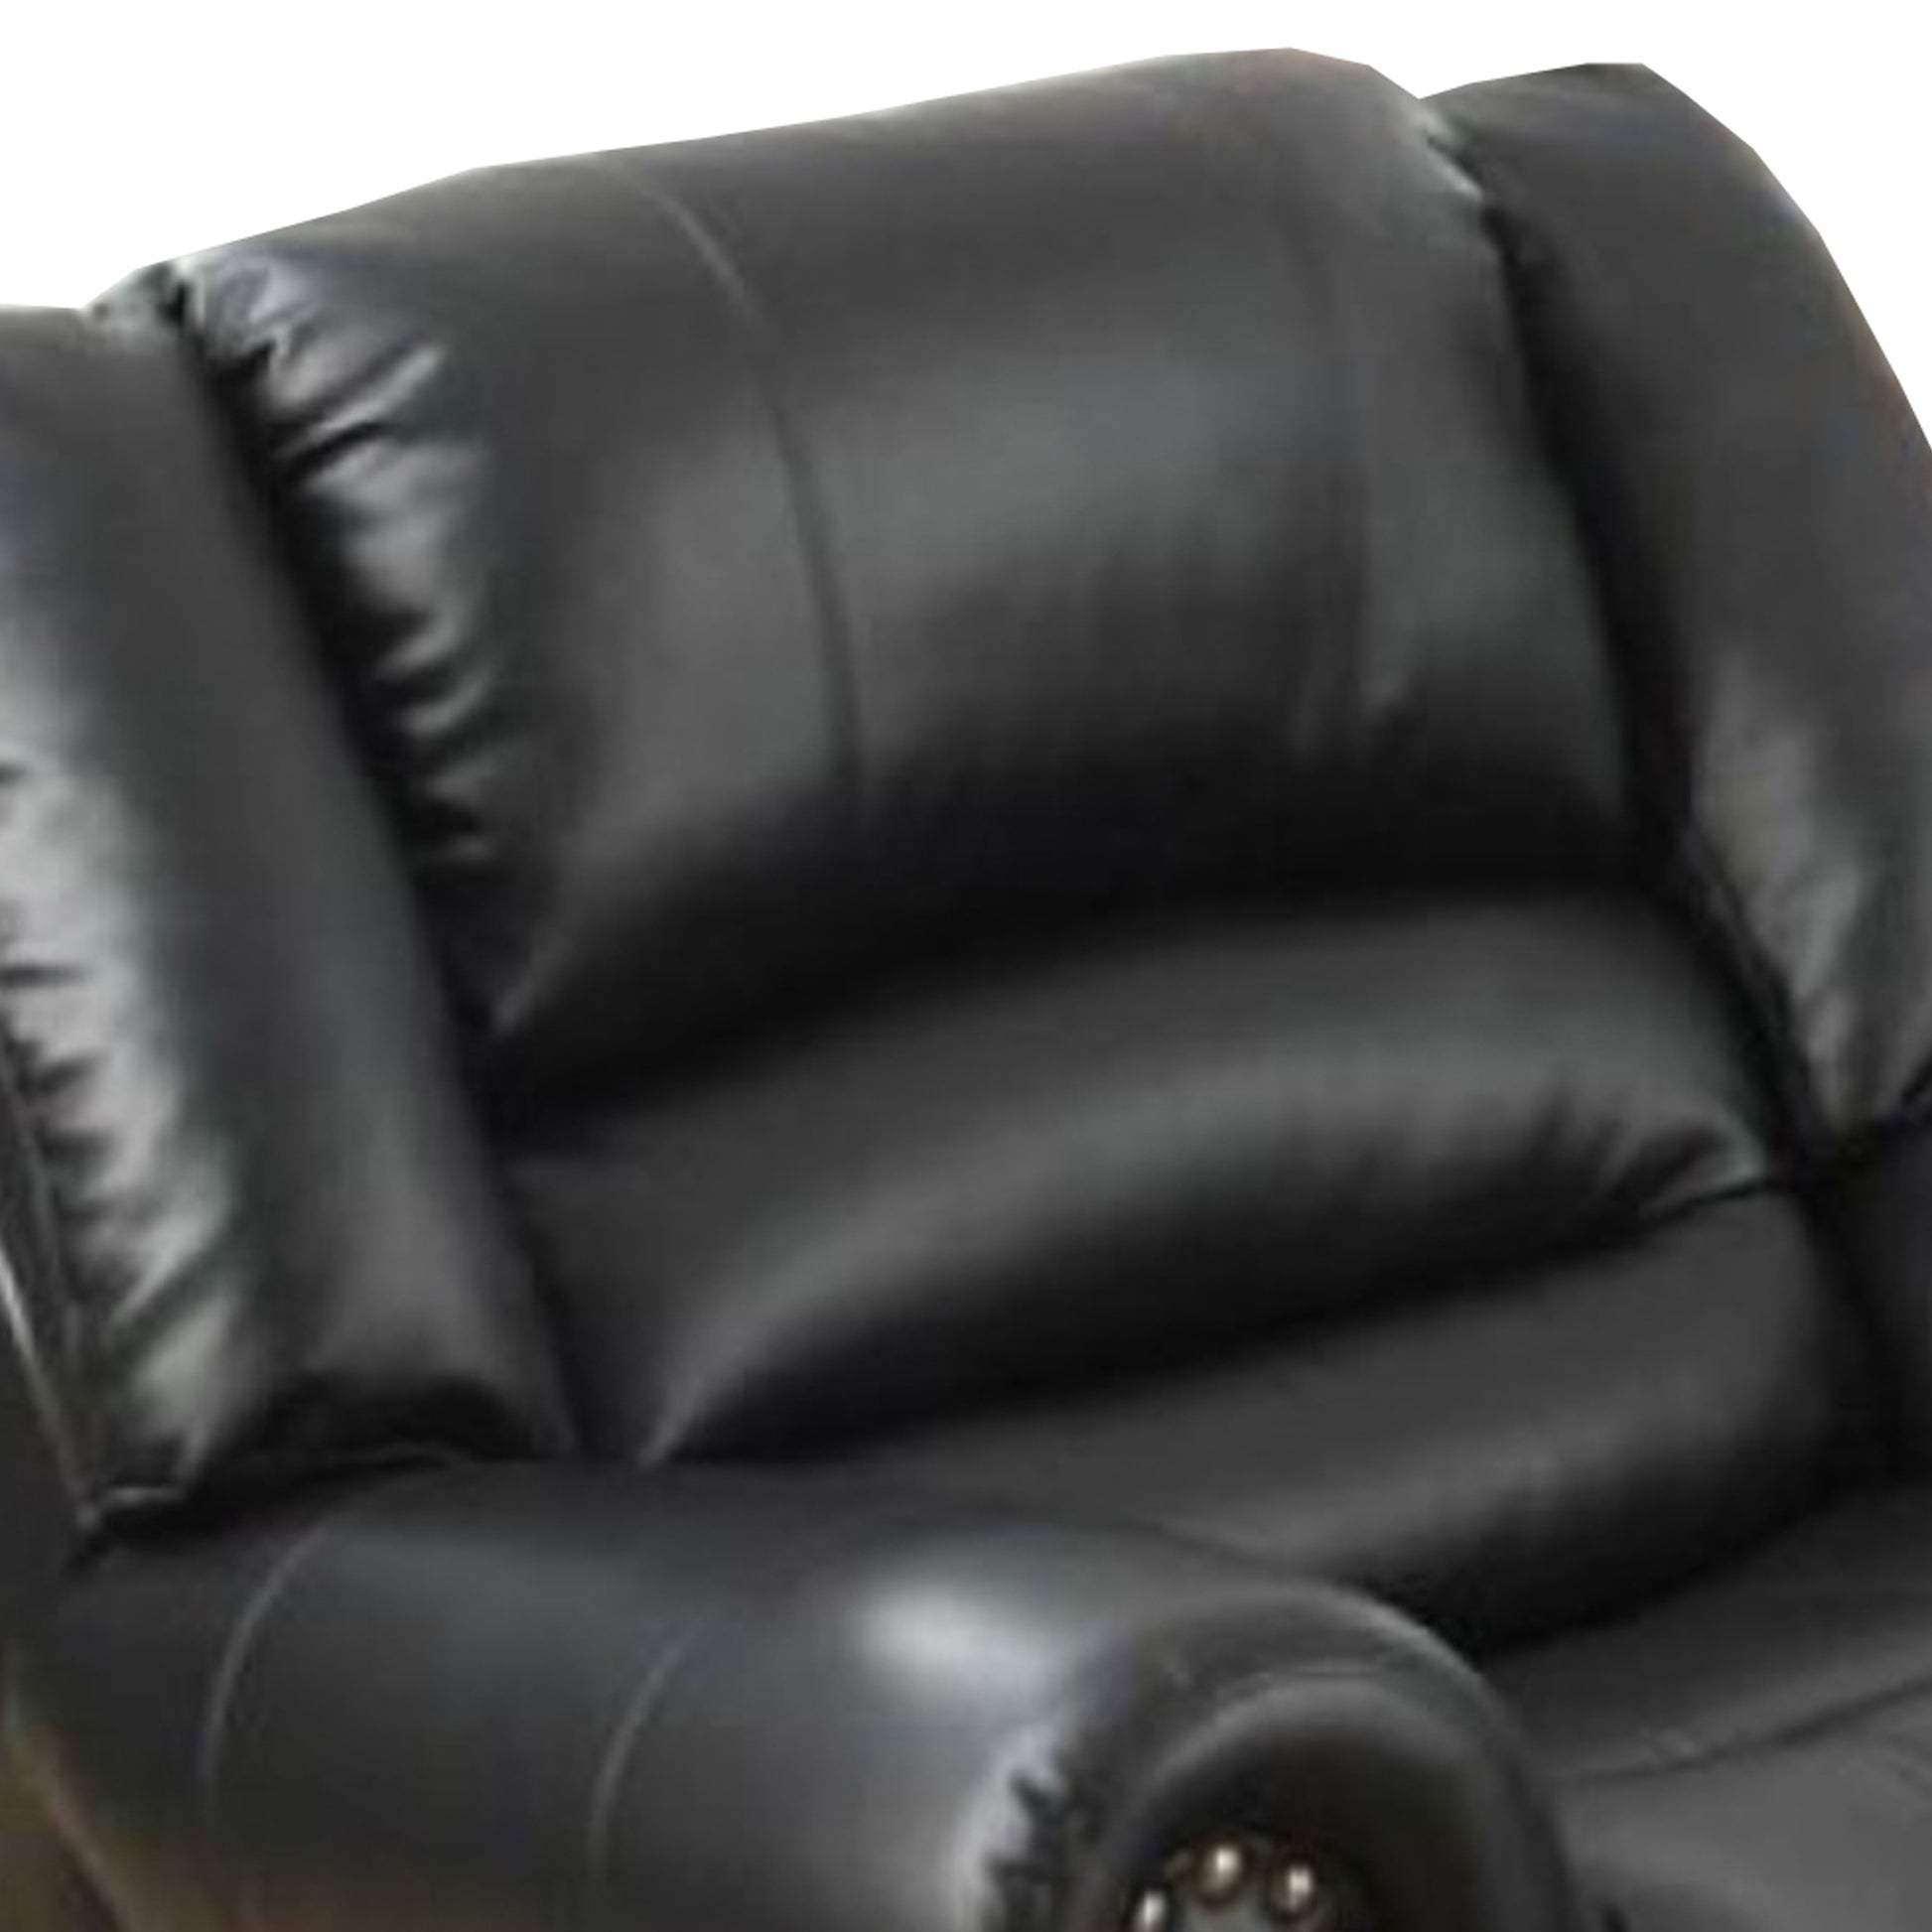 Immense Relief Bonded Leather & Plywood Recliner/Glider Black PDX-F6751